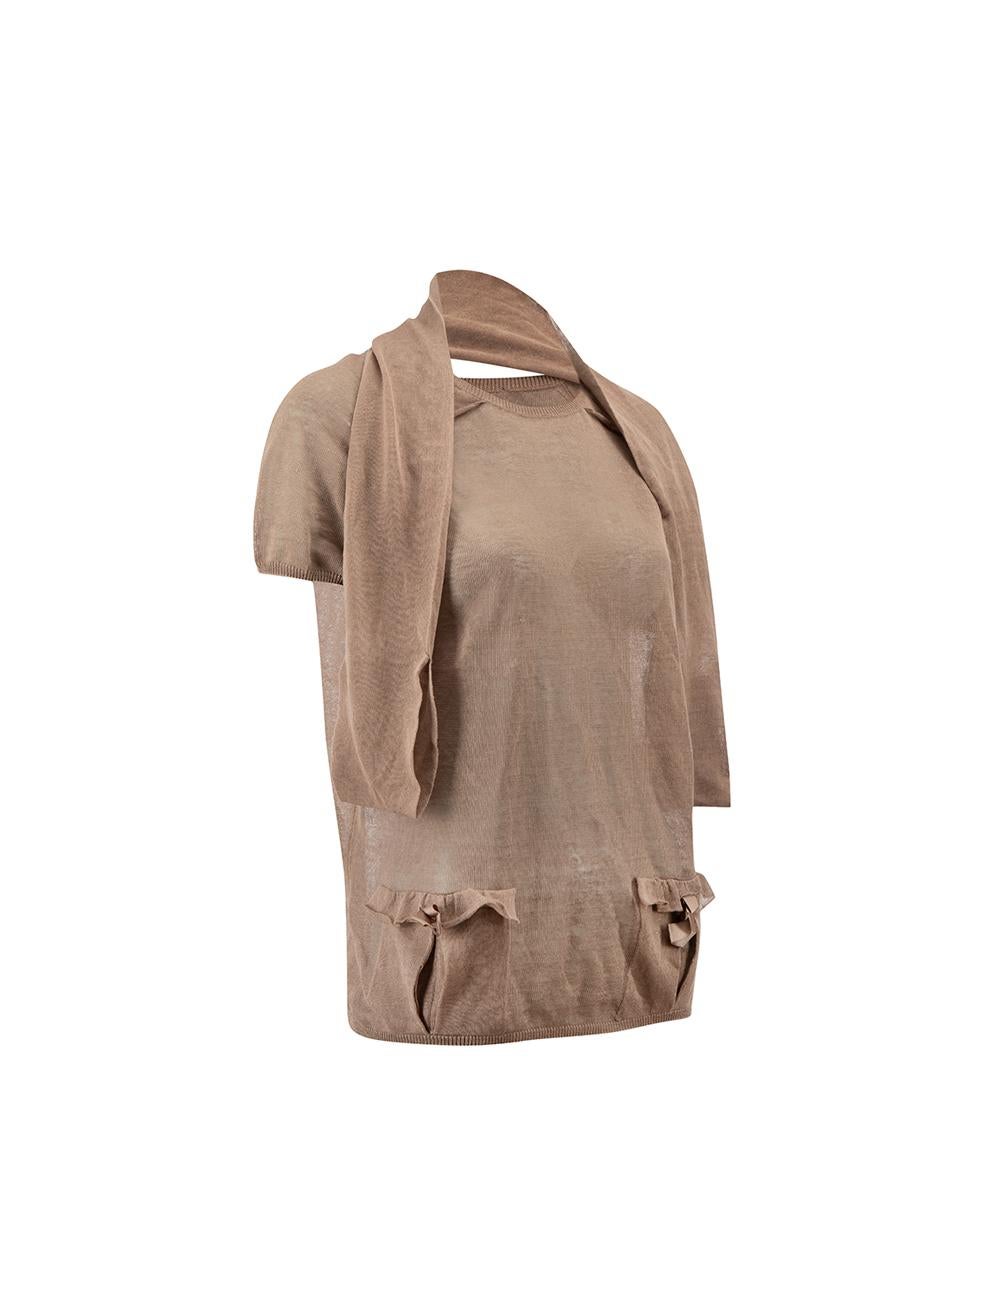 CONDITION is Very good. Minimal wear to knitwear is evident. Minimal wear to surface with some pilling and very small pulls seen throughout the knit on this used Valentino designer resale item.



Details


Brown

Linen

Knit top

Round neck

Short